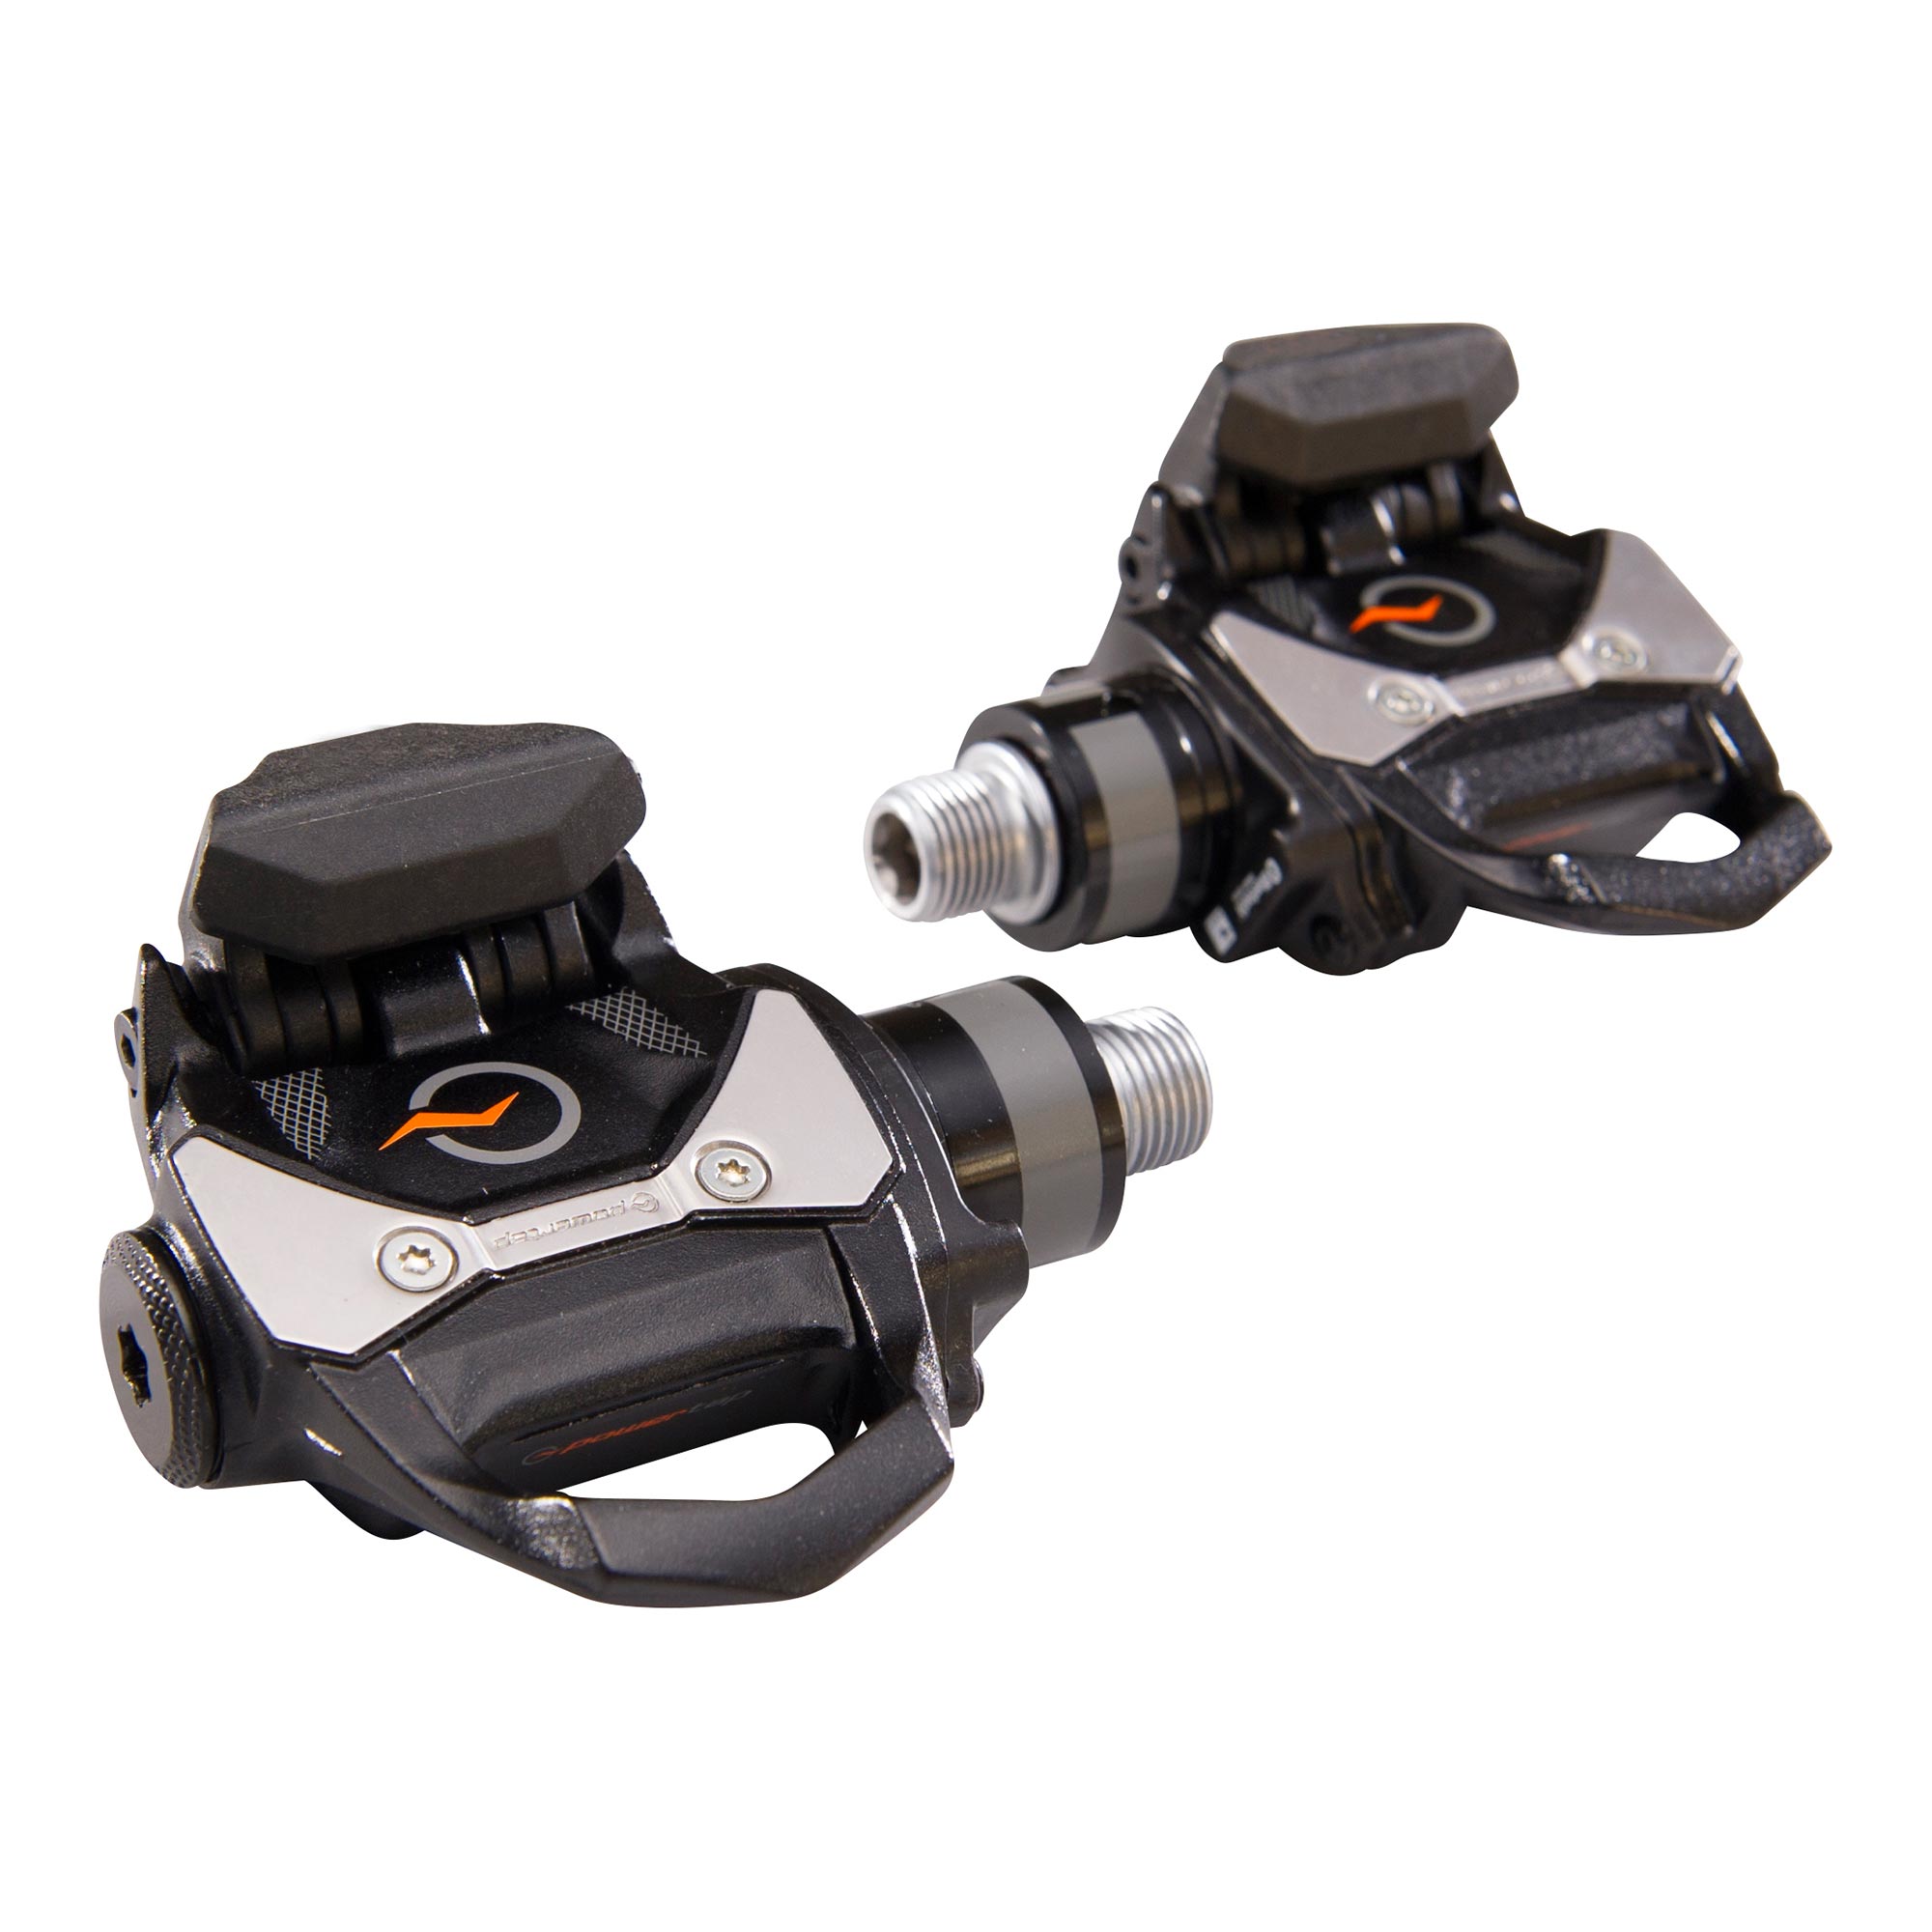 power pedals cycling